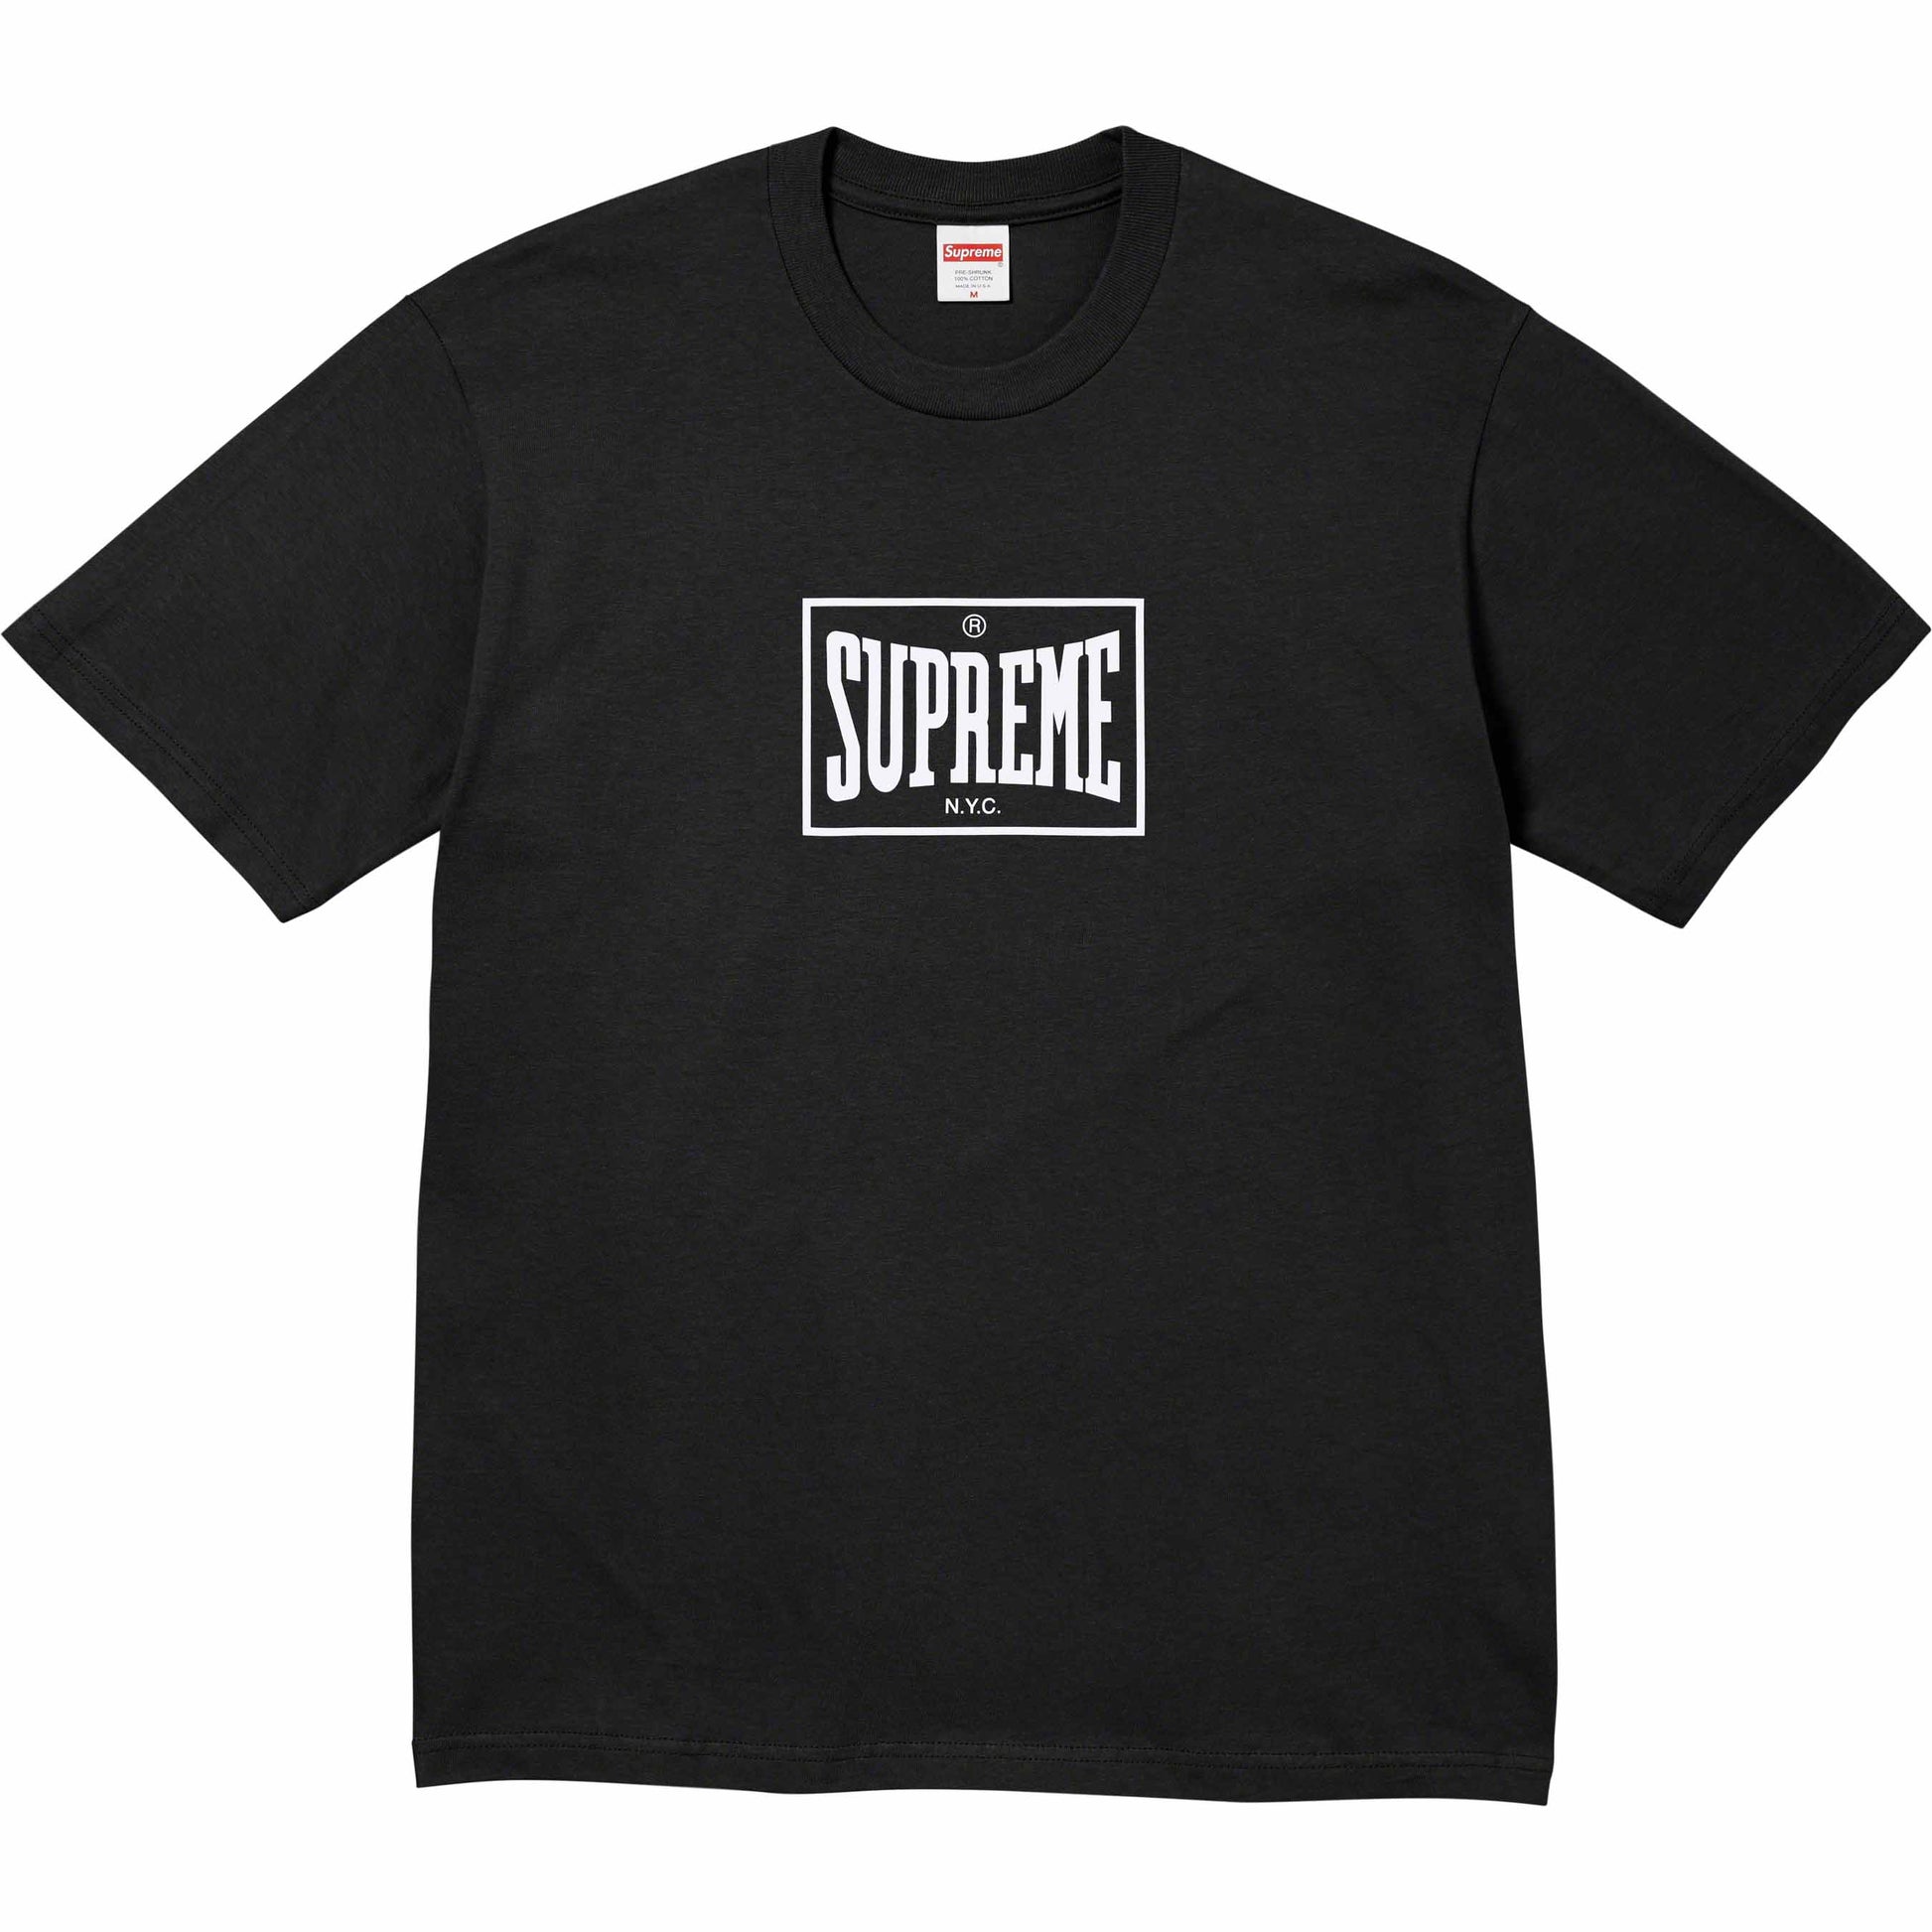 Supreme Warm Up Tee Black by Supreme from £68.00